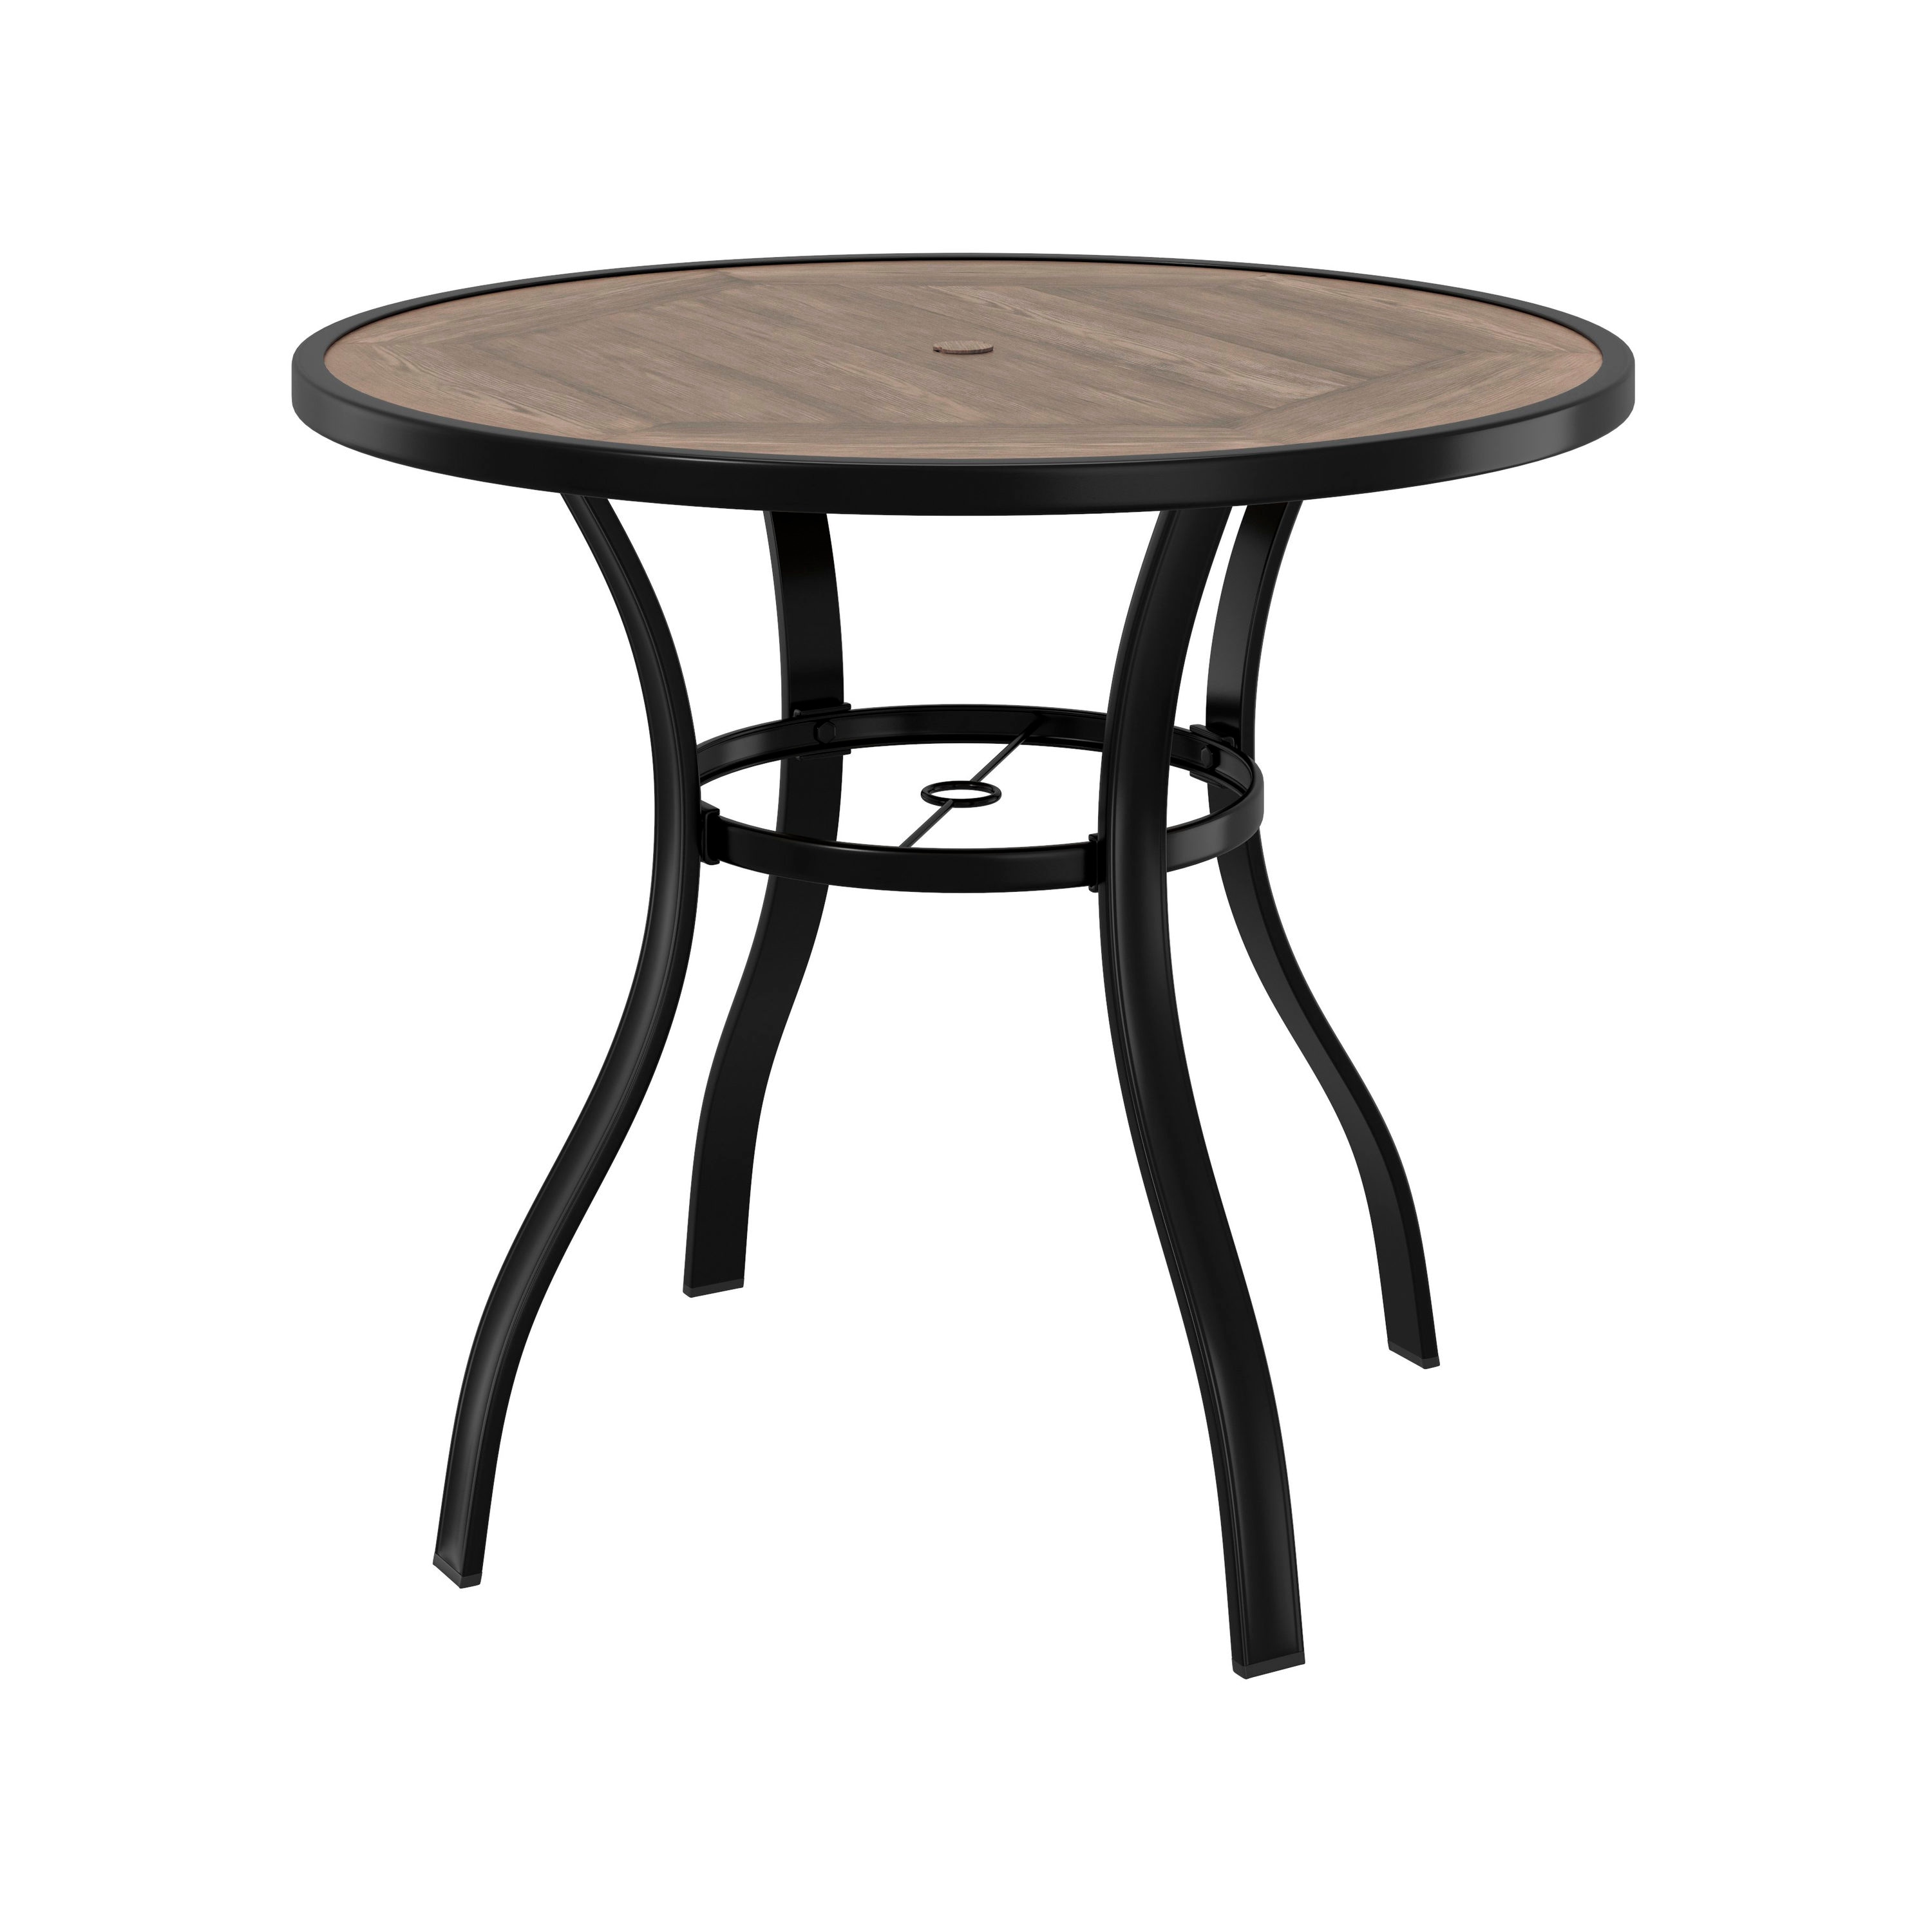 Roth Copper Pointe Round Outdoor Dining, Round Patio Table With Umbrella Hole Set